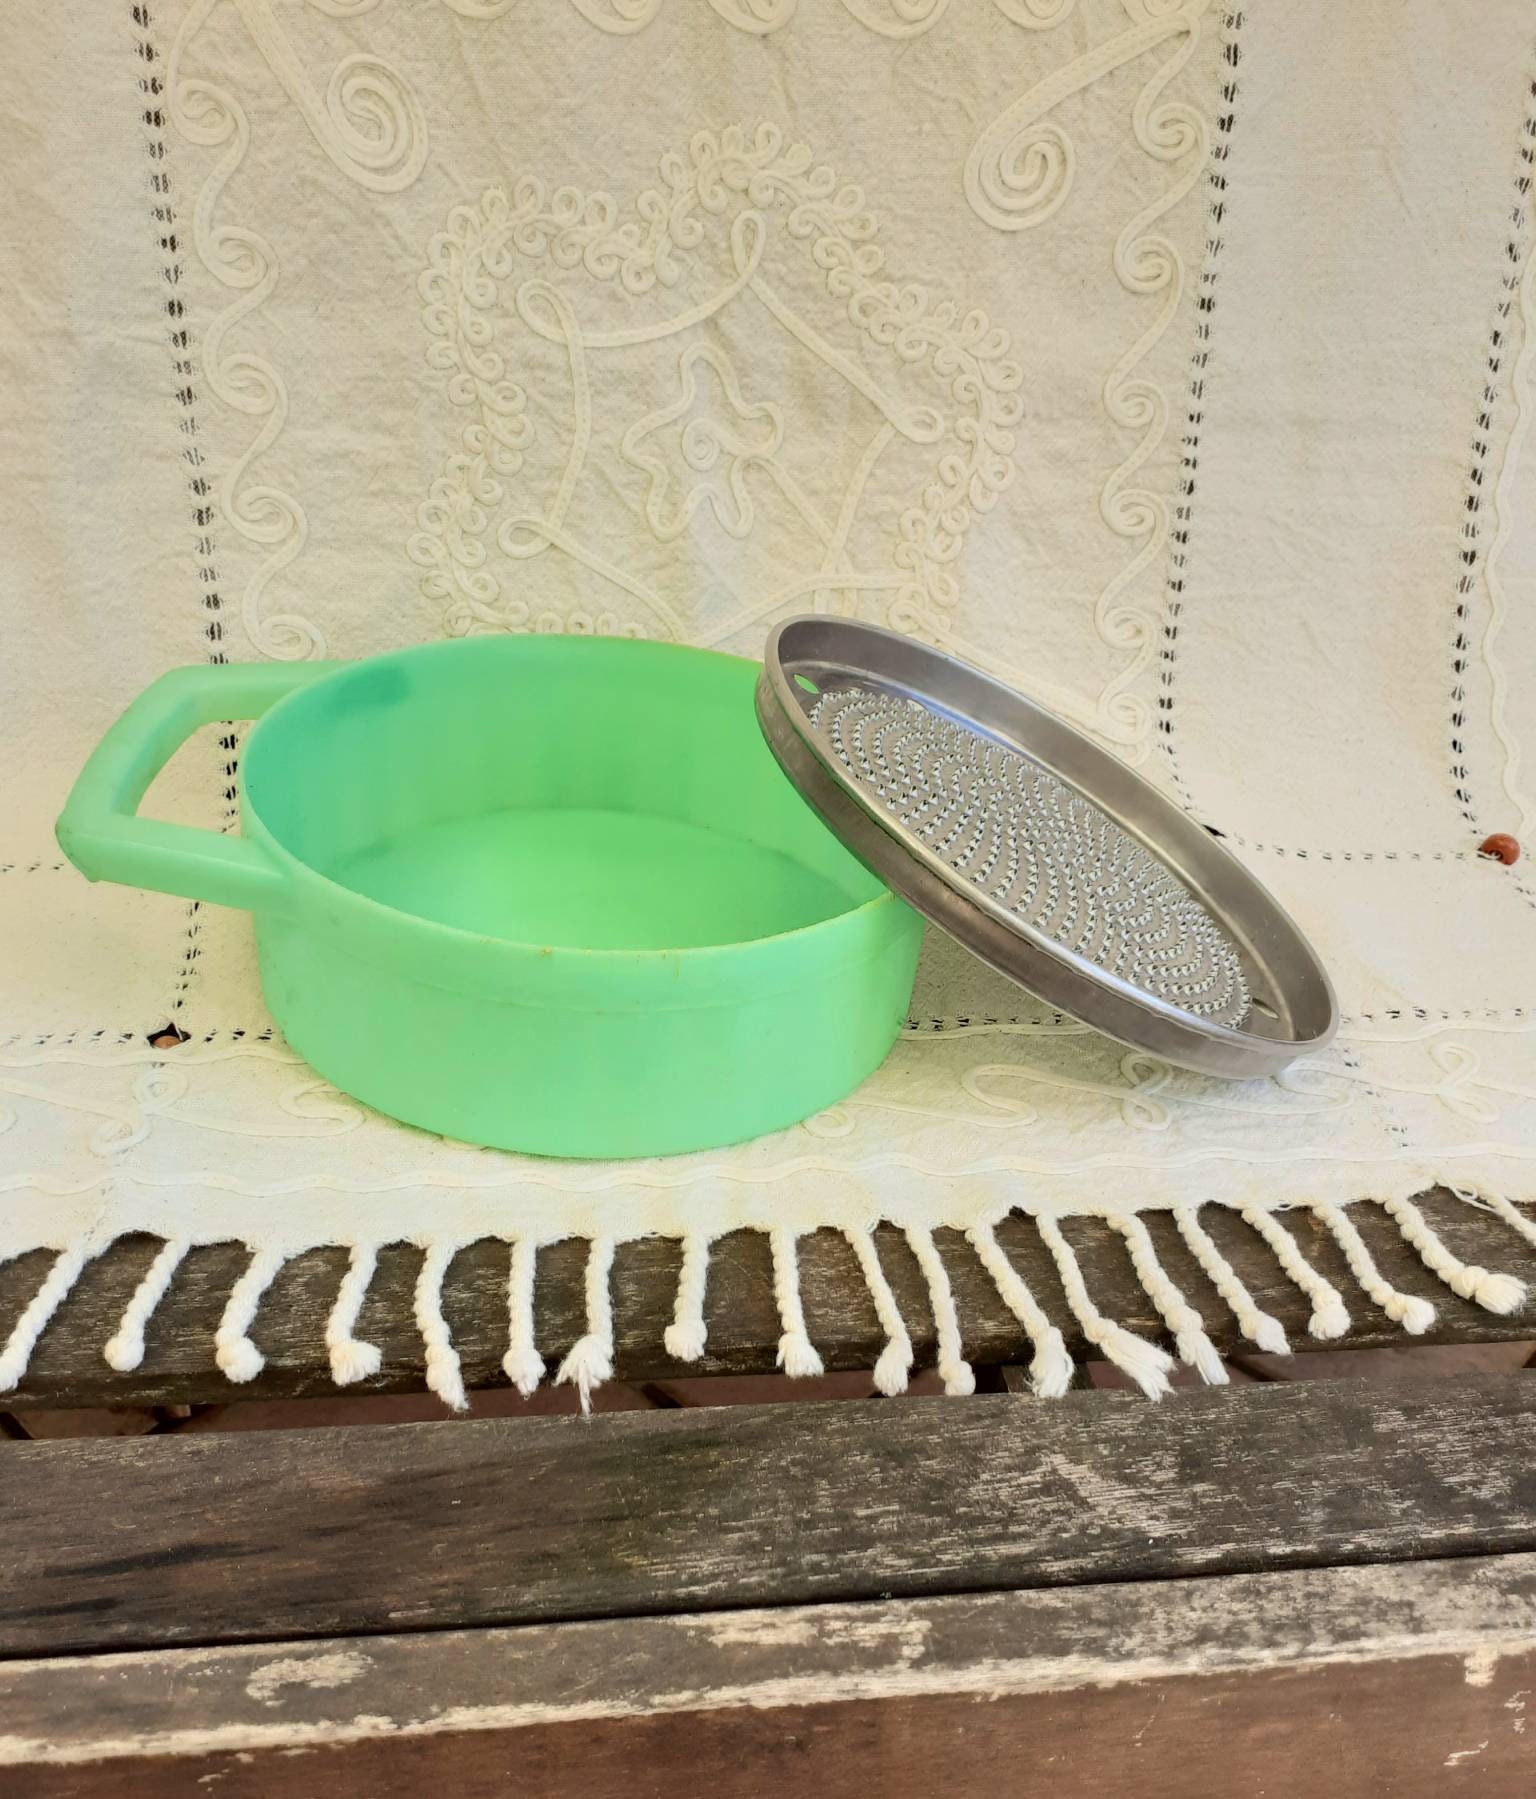 Vintage 1950s Italian Round Steel Cheese Grater Box for Parmesan